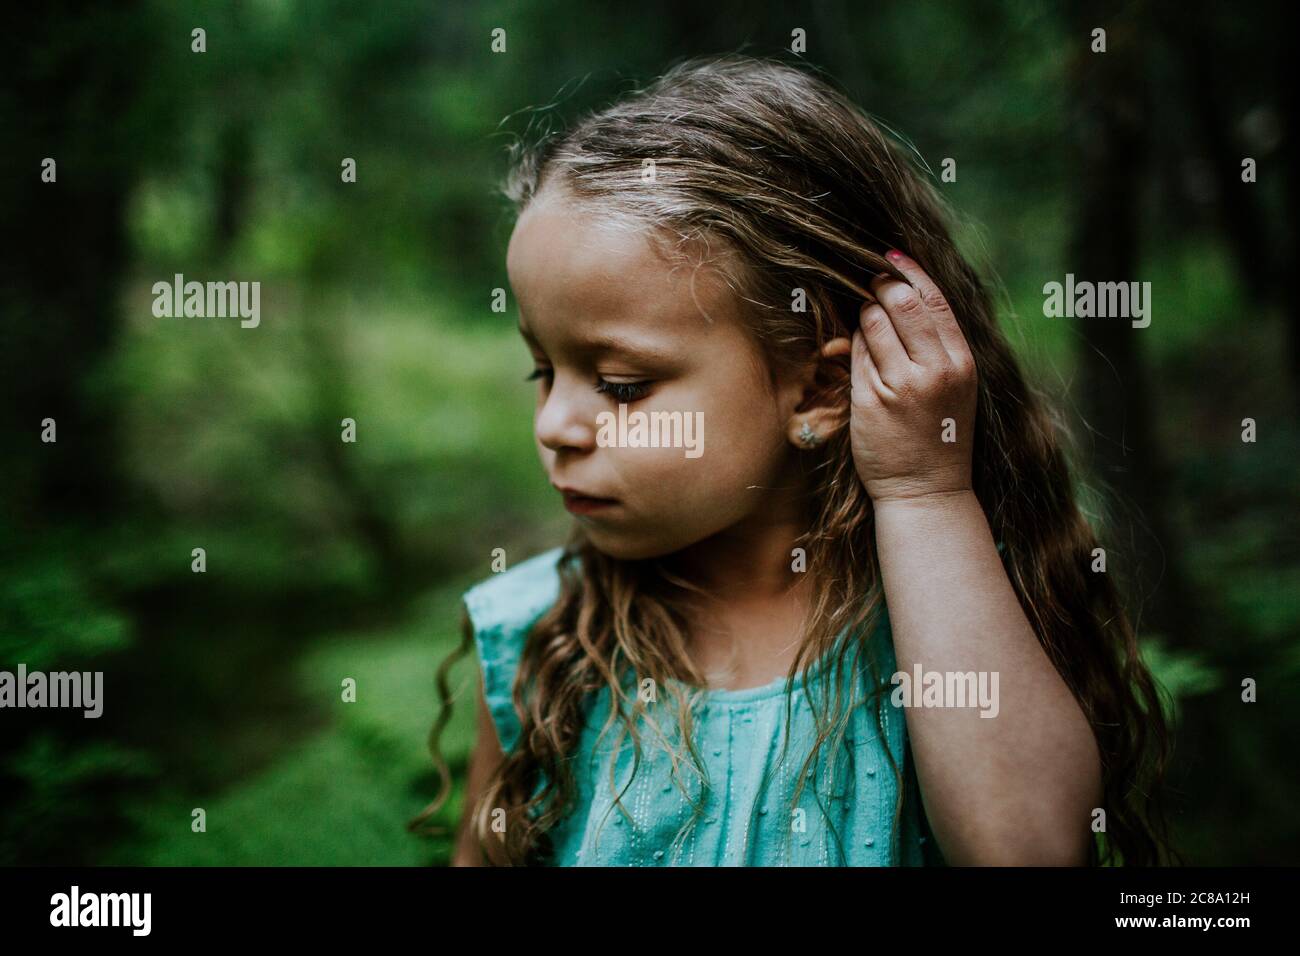 Young biracial girl looking down and fixing hair Stock Photo